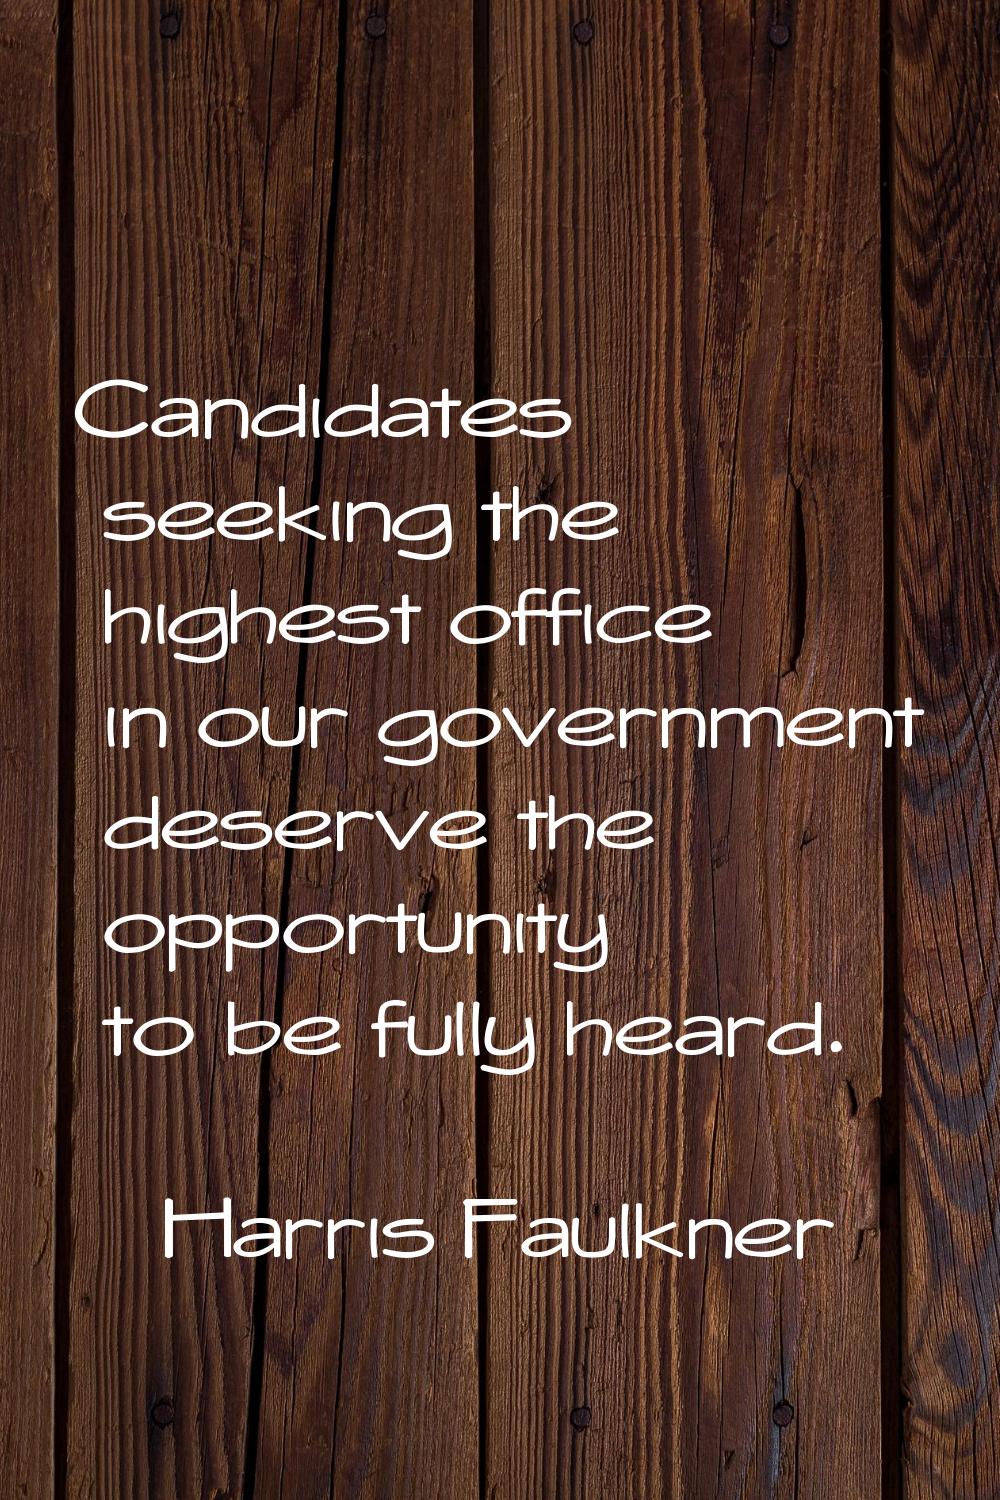 Candidates seeking the highest office in our government deserve the opportunity to be fully heard.